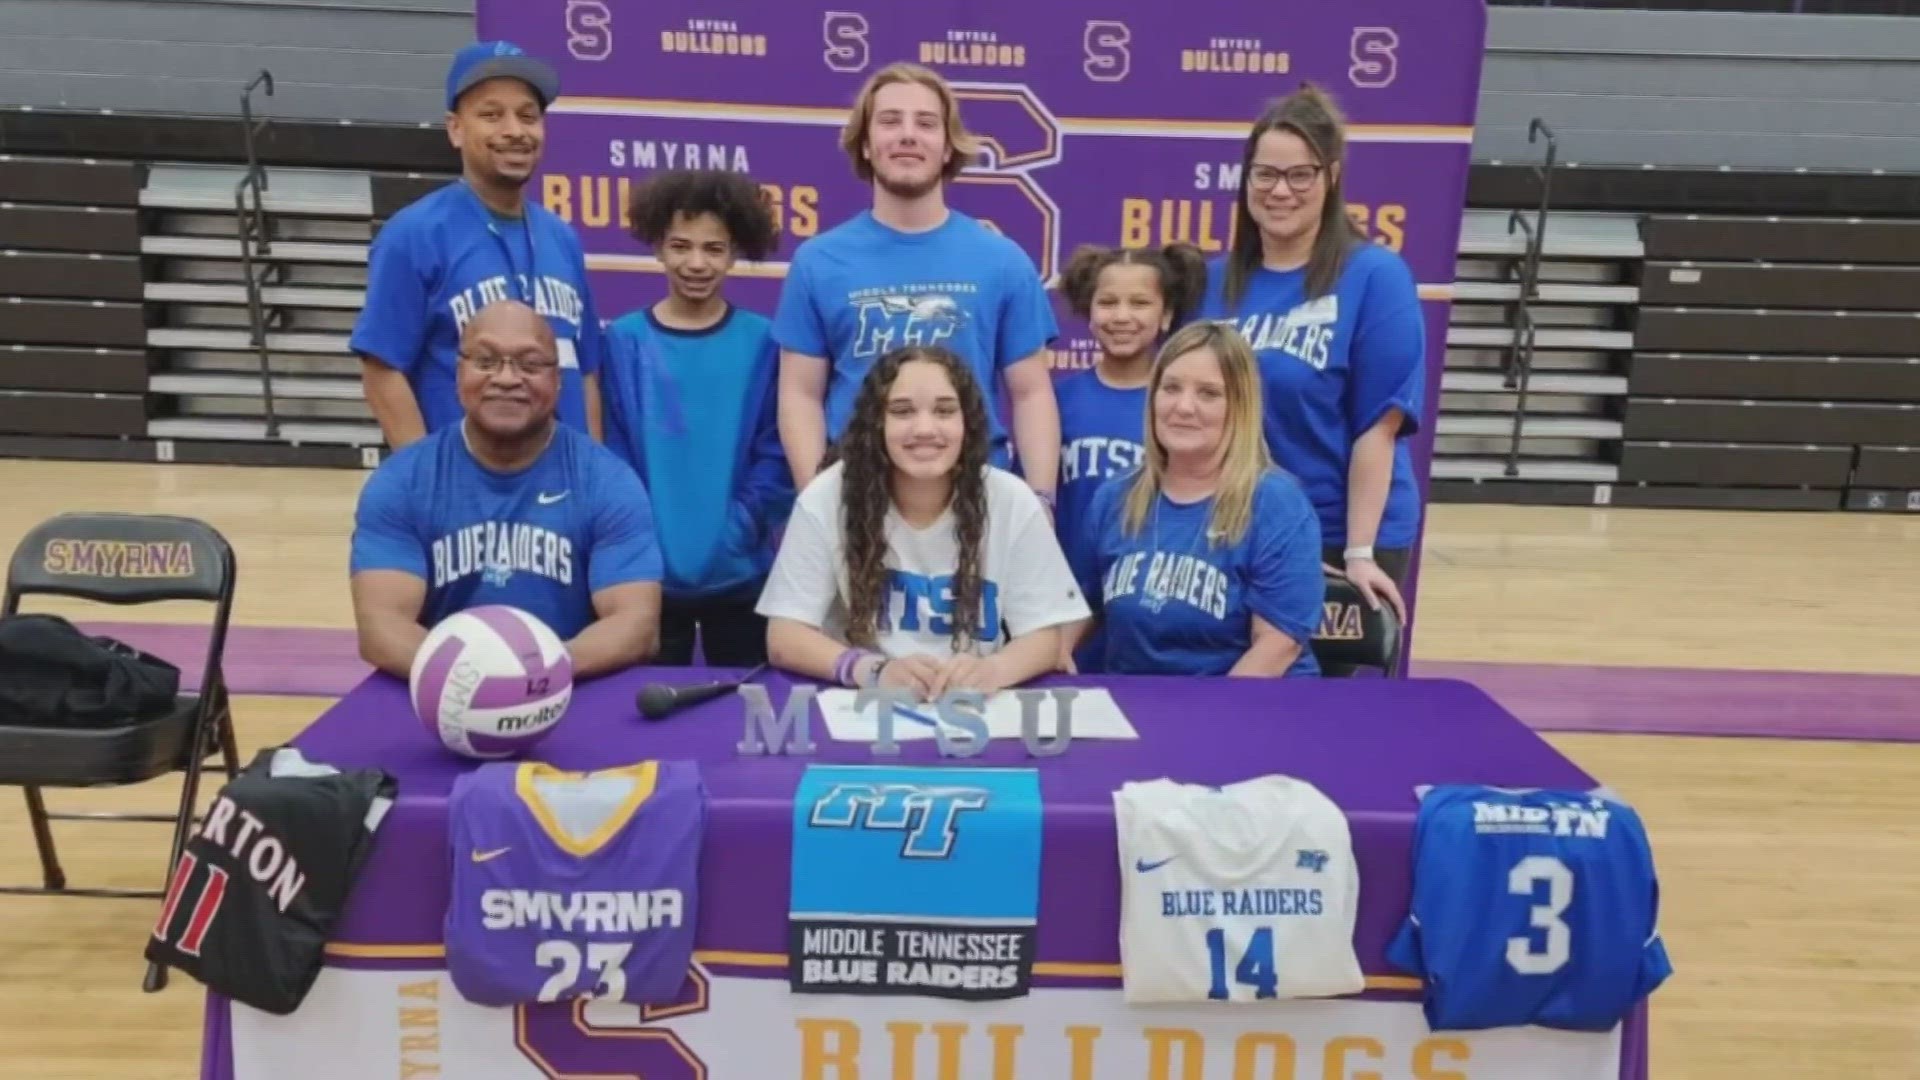 The teen lost her legs earlier this year in a St. Louis crash. Now, she is signed on to play volleyball at Middle Tennessee State University.